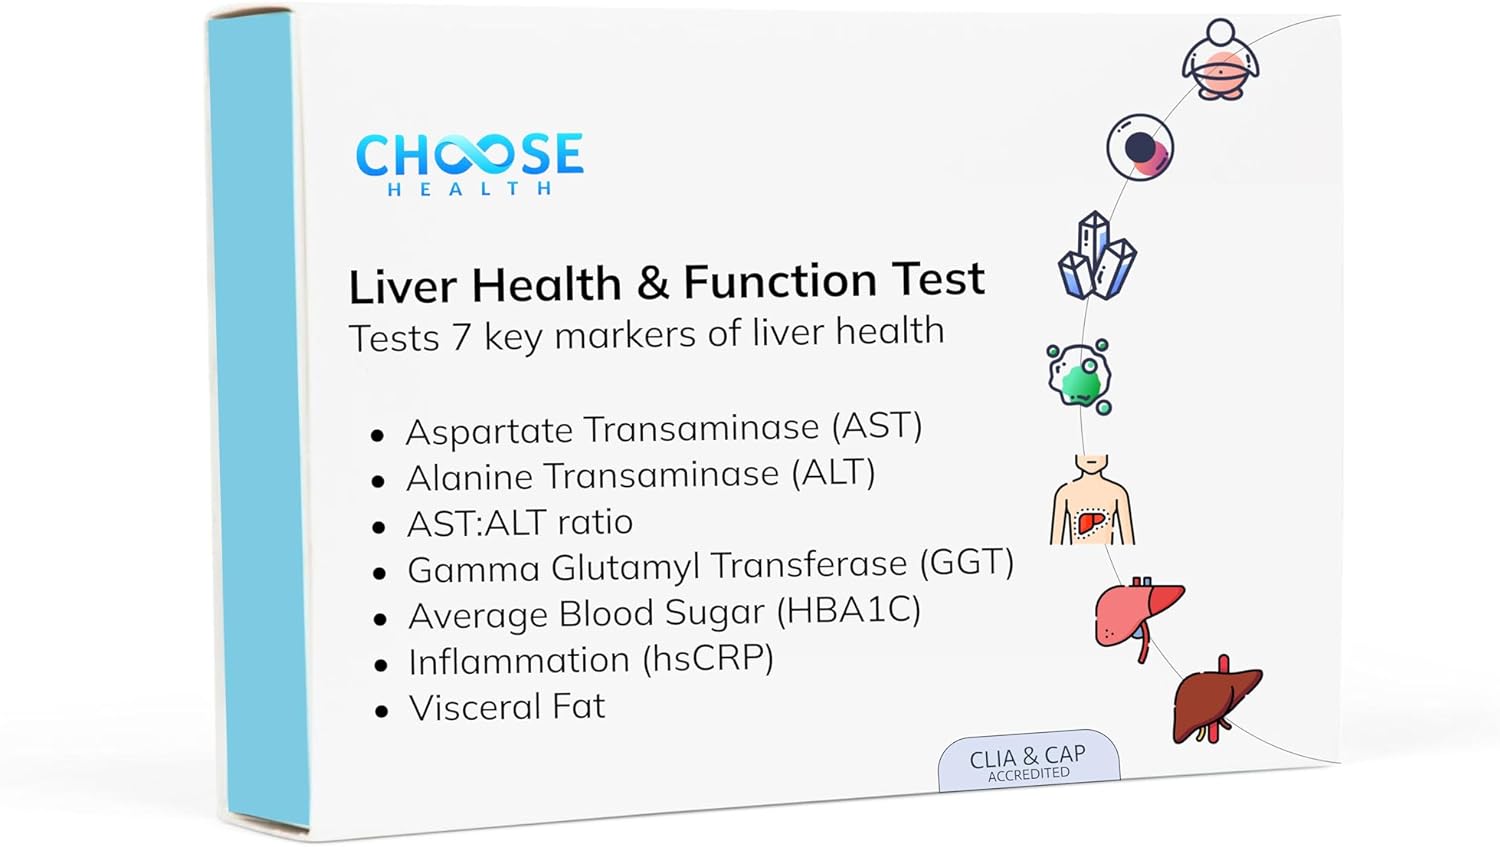 Choose Health 7-in-1 at-Home Liver Health Test | Test and Track Liver Function  Health | AST | ALT | GGT | Blood Sugars | Inflammation and More | Not Avail in NY RI